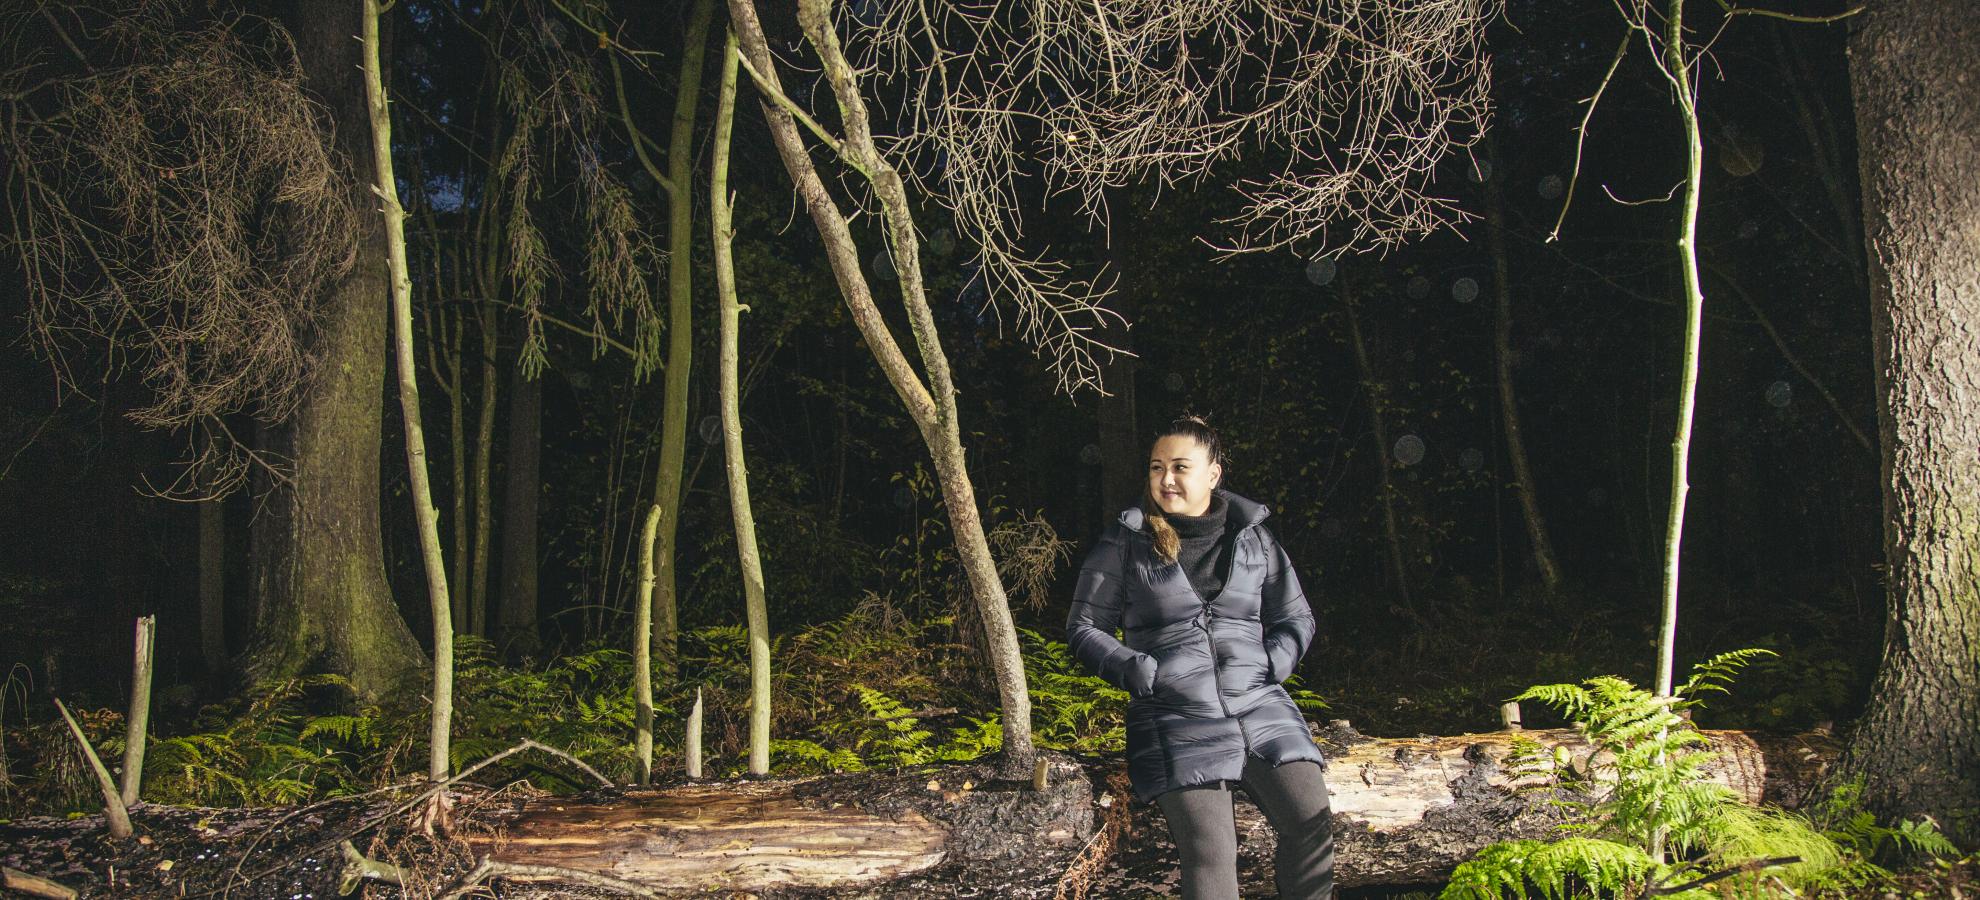 Adele Asuncion leaning against a fallen tree in the woods, looking to the left.